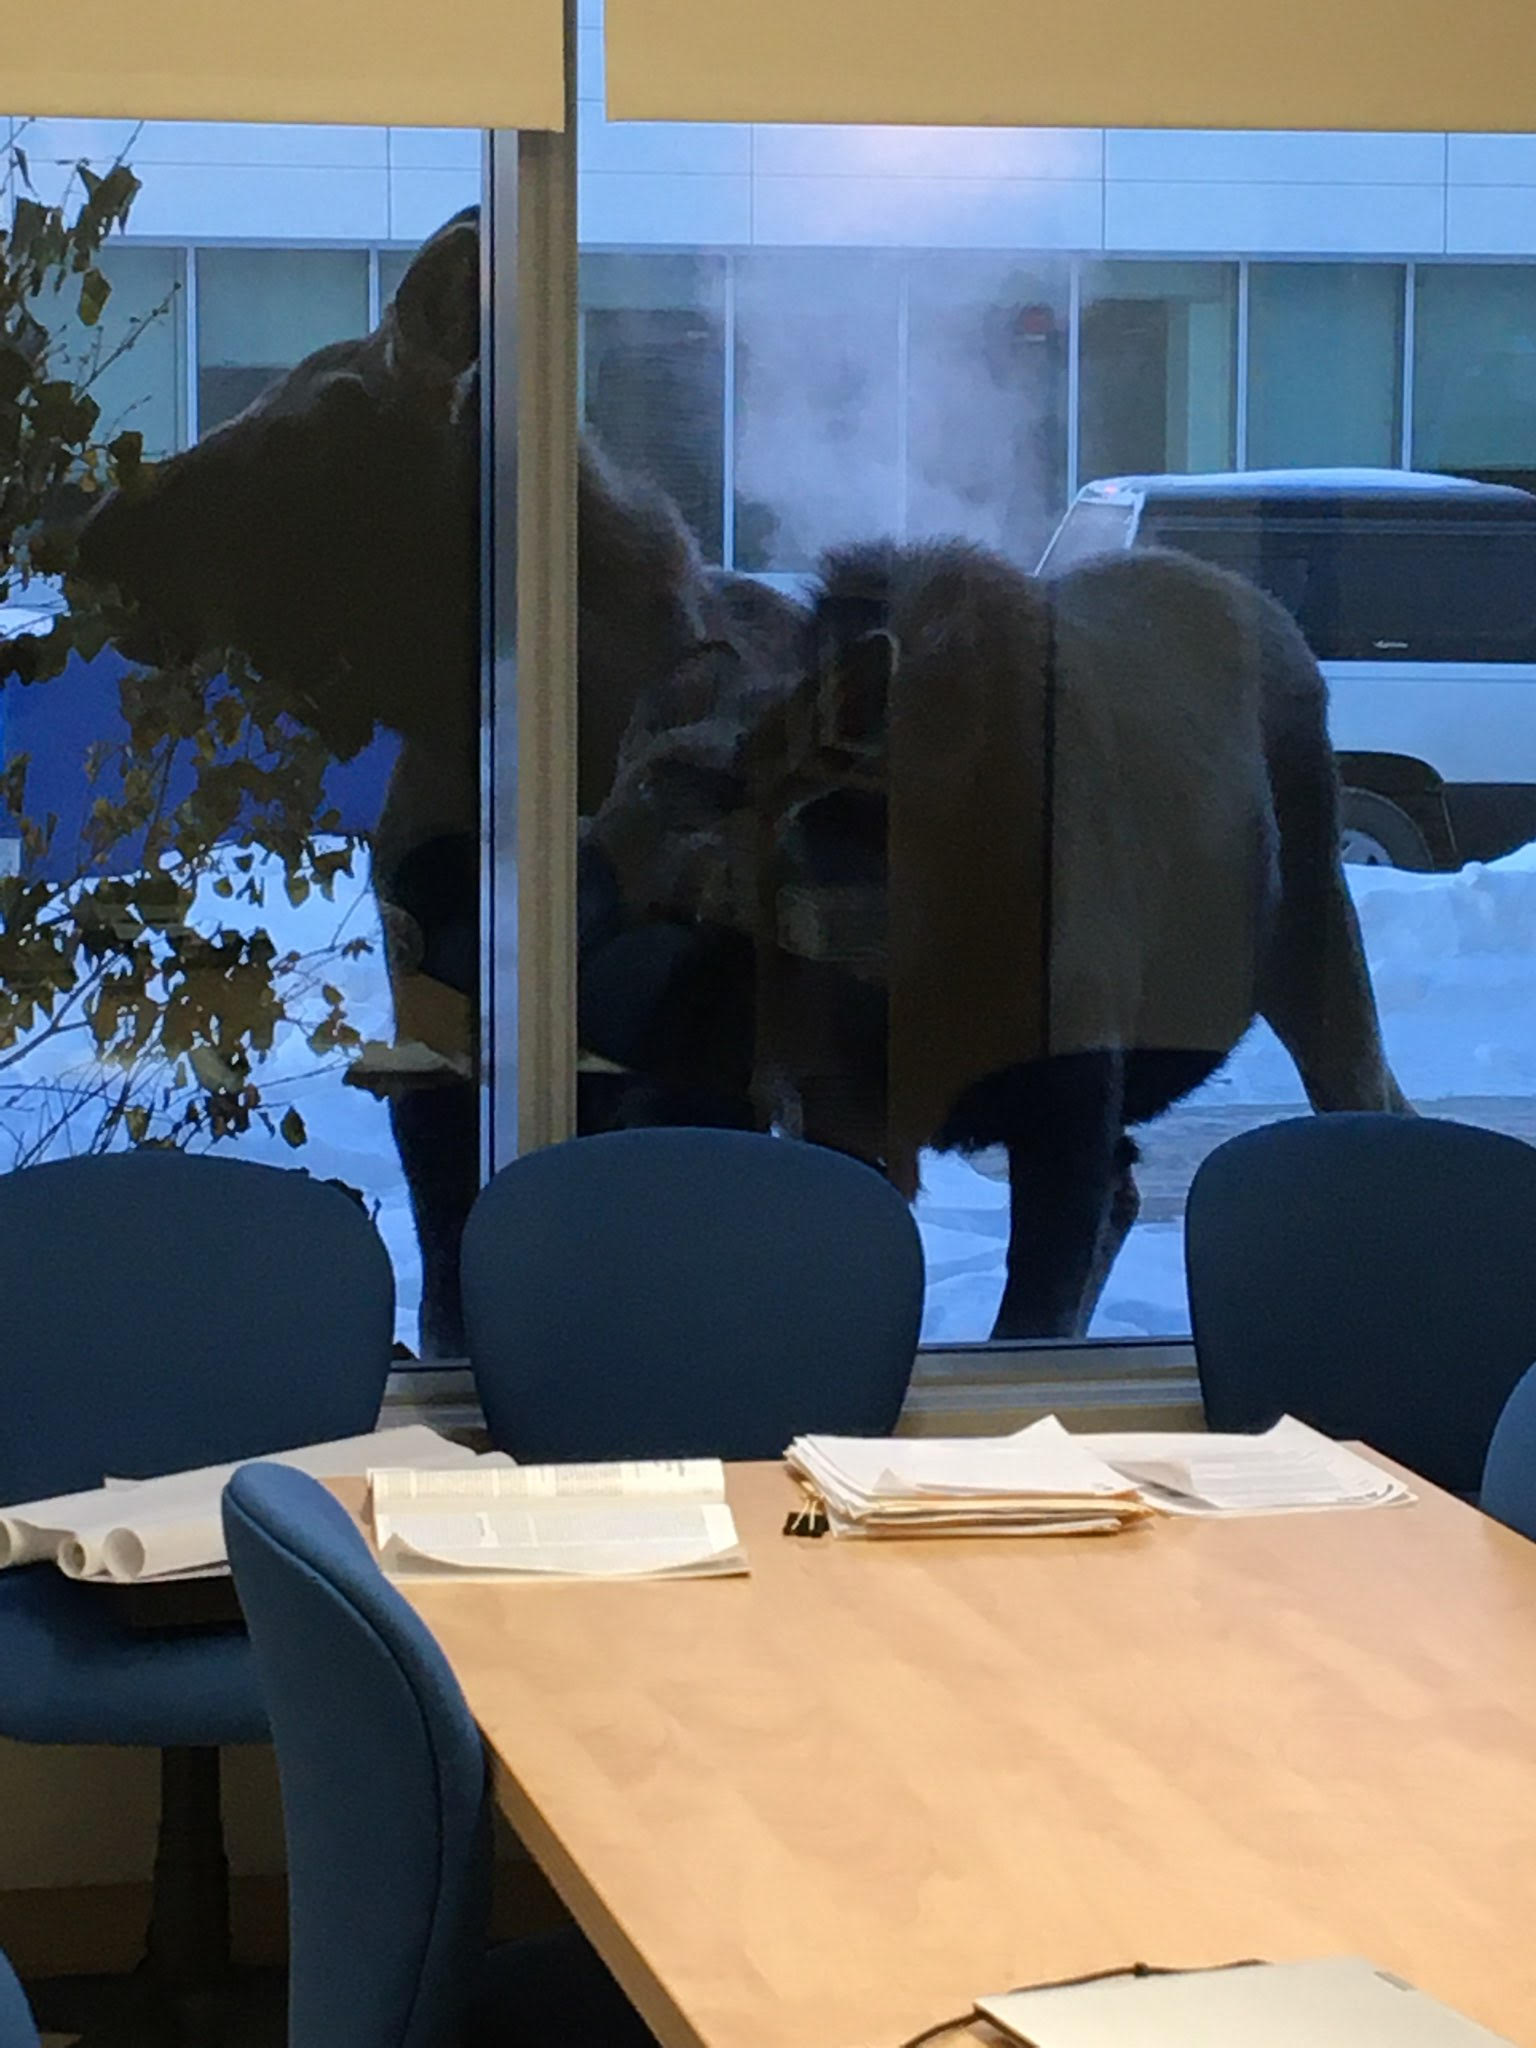 Two moose seen through the window of an office building. They're browsing on a bush but it also looks like they might be trying to peer inside the office.